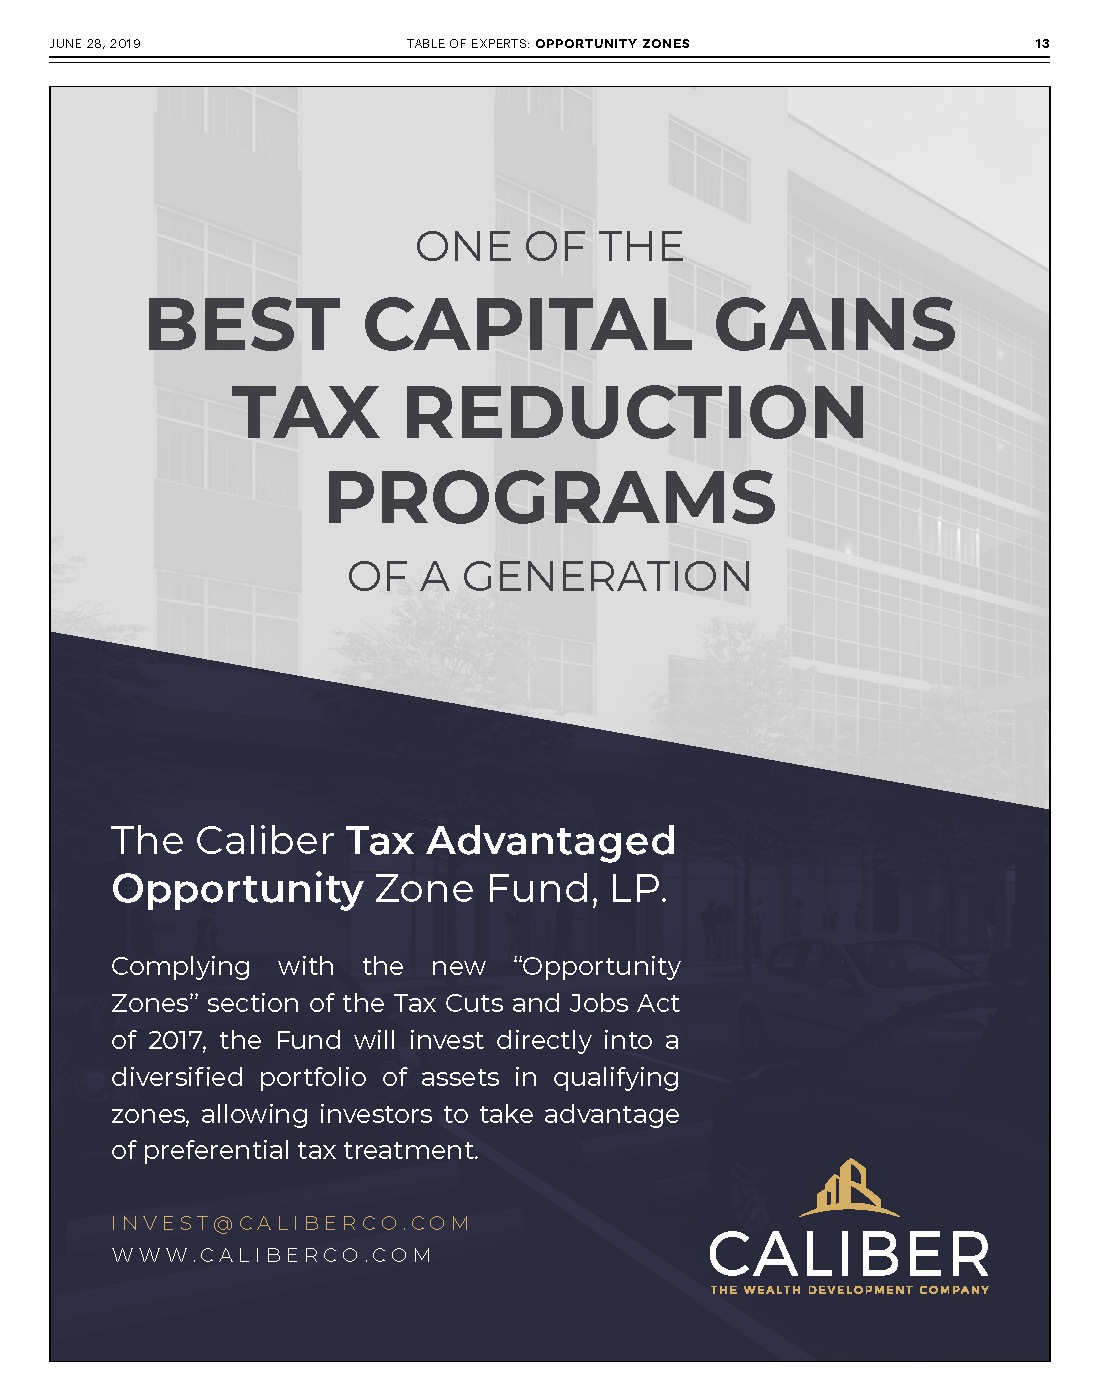 Caliber ad highlighting opportunity zone funds as "one of the best capital gains tax reduction programs of a generation."